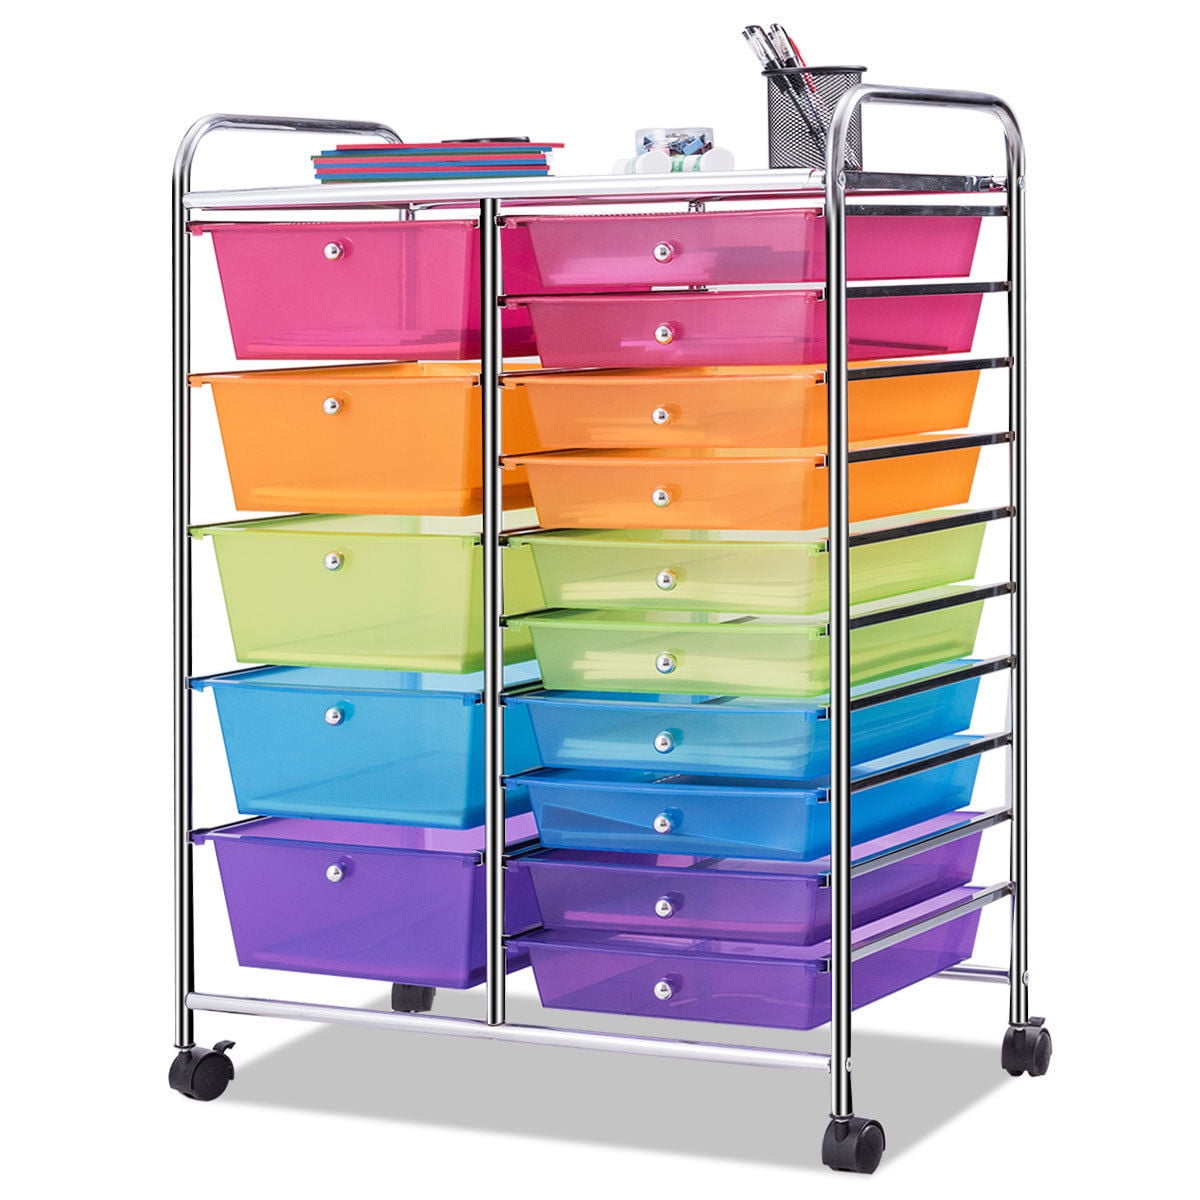 BestComfort Rolling Storage Cart with 10 Drawers Multipurpose Storage Organizer Cart for School Office Home Beauty Salon Mobile Utility Cart Storage Organizer with Lockable Casters 